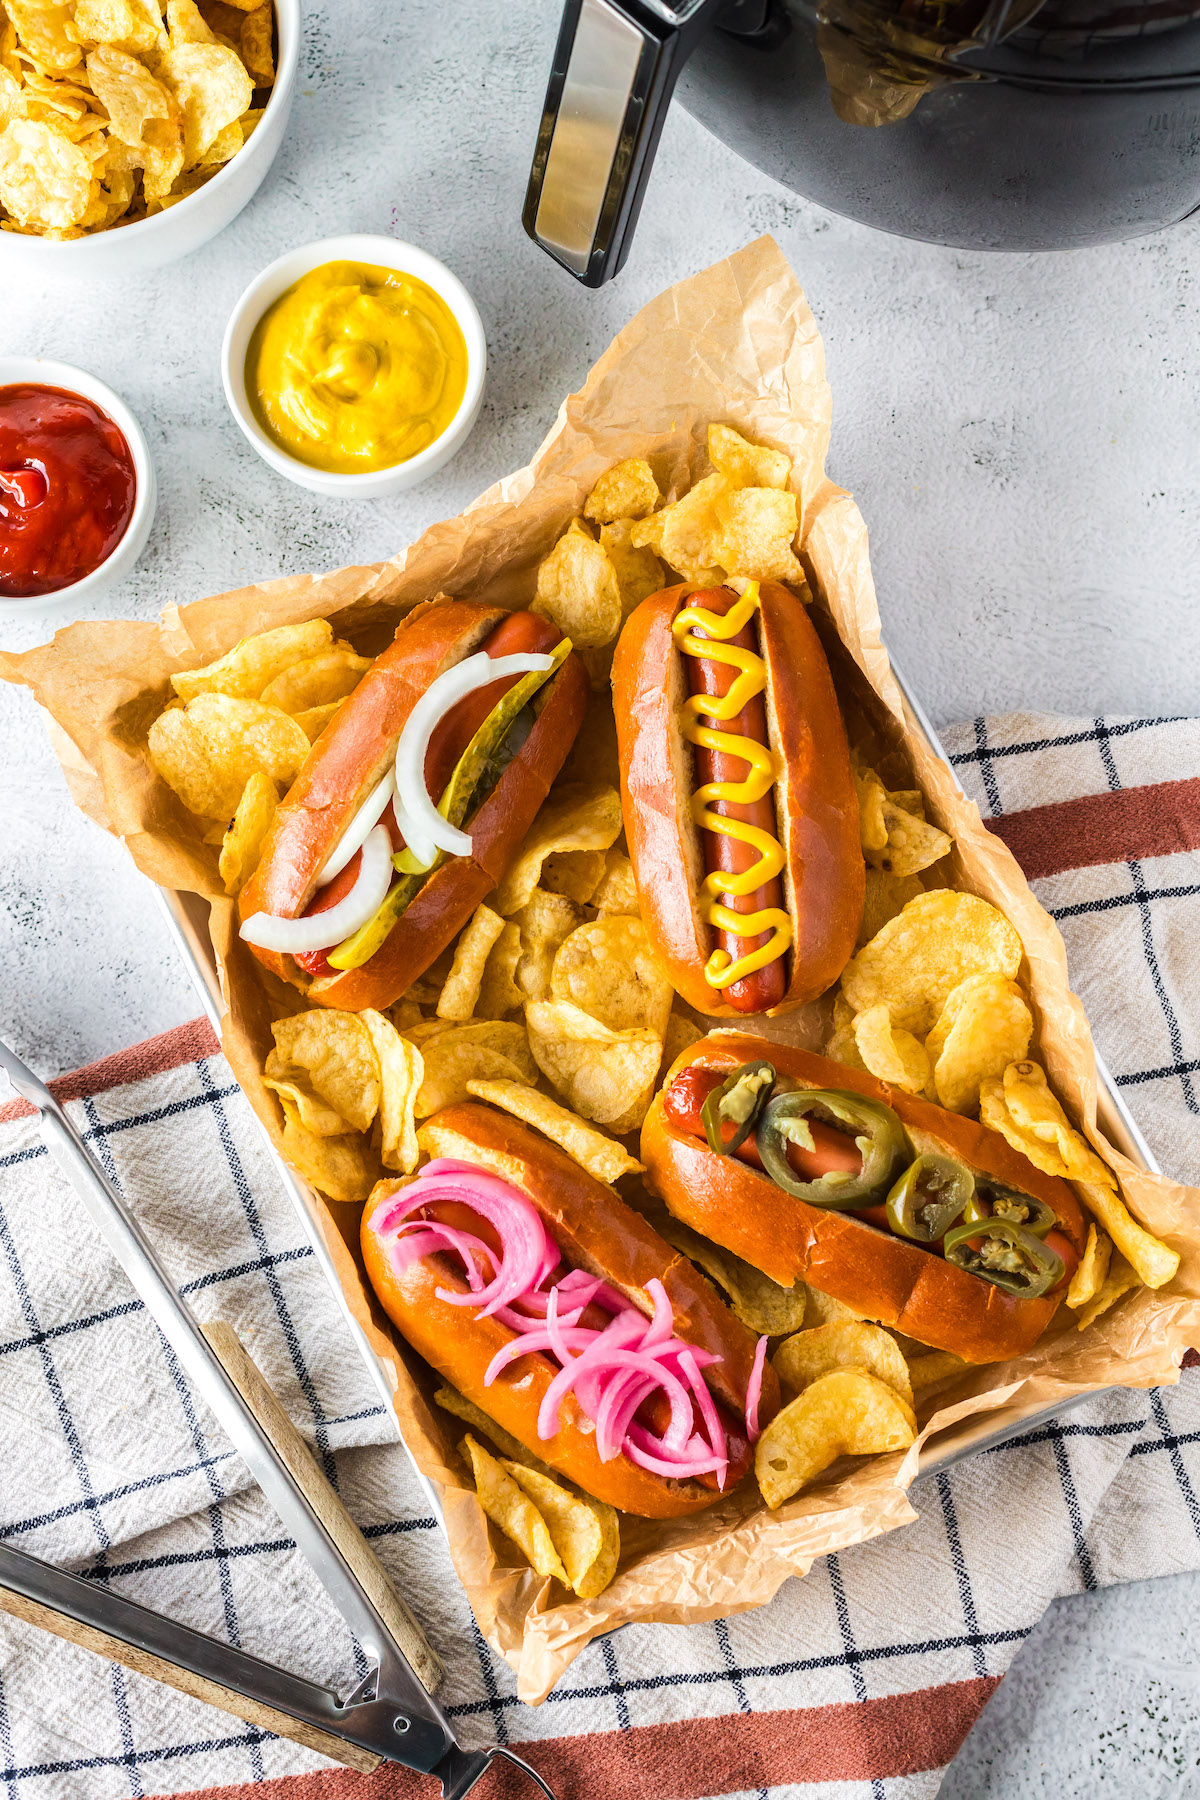 hot dogs served with chips and condiments